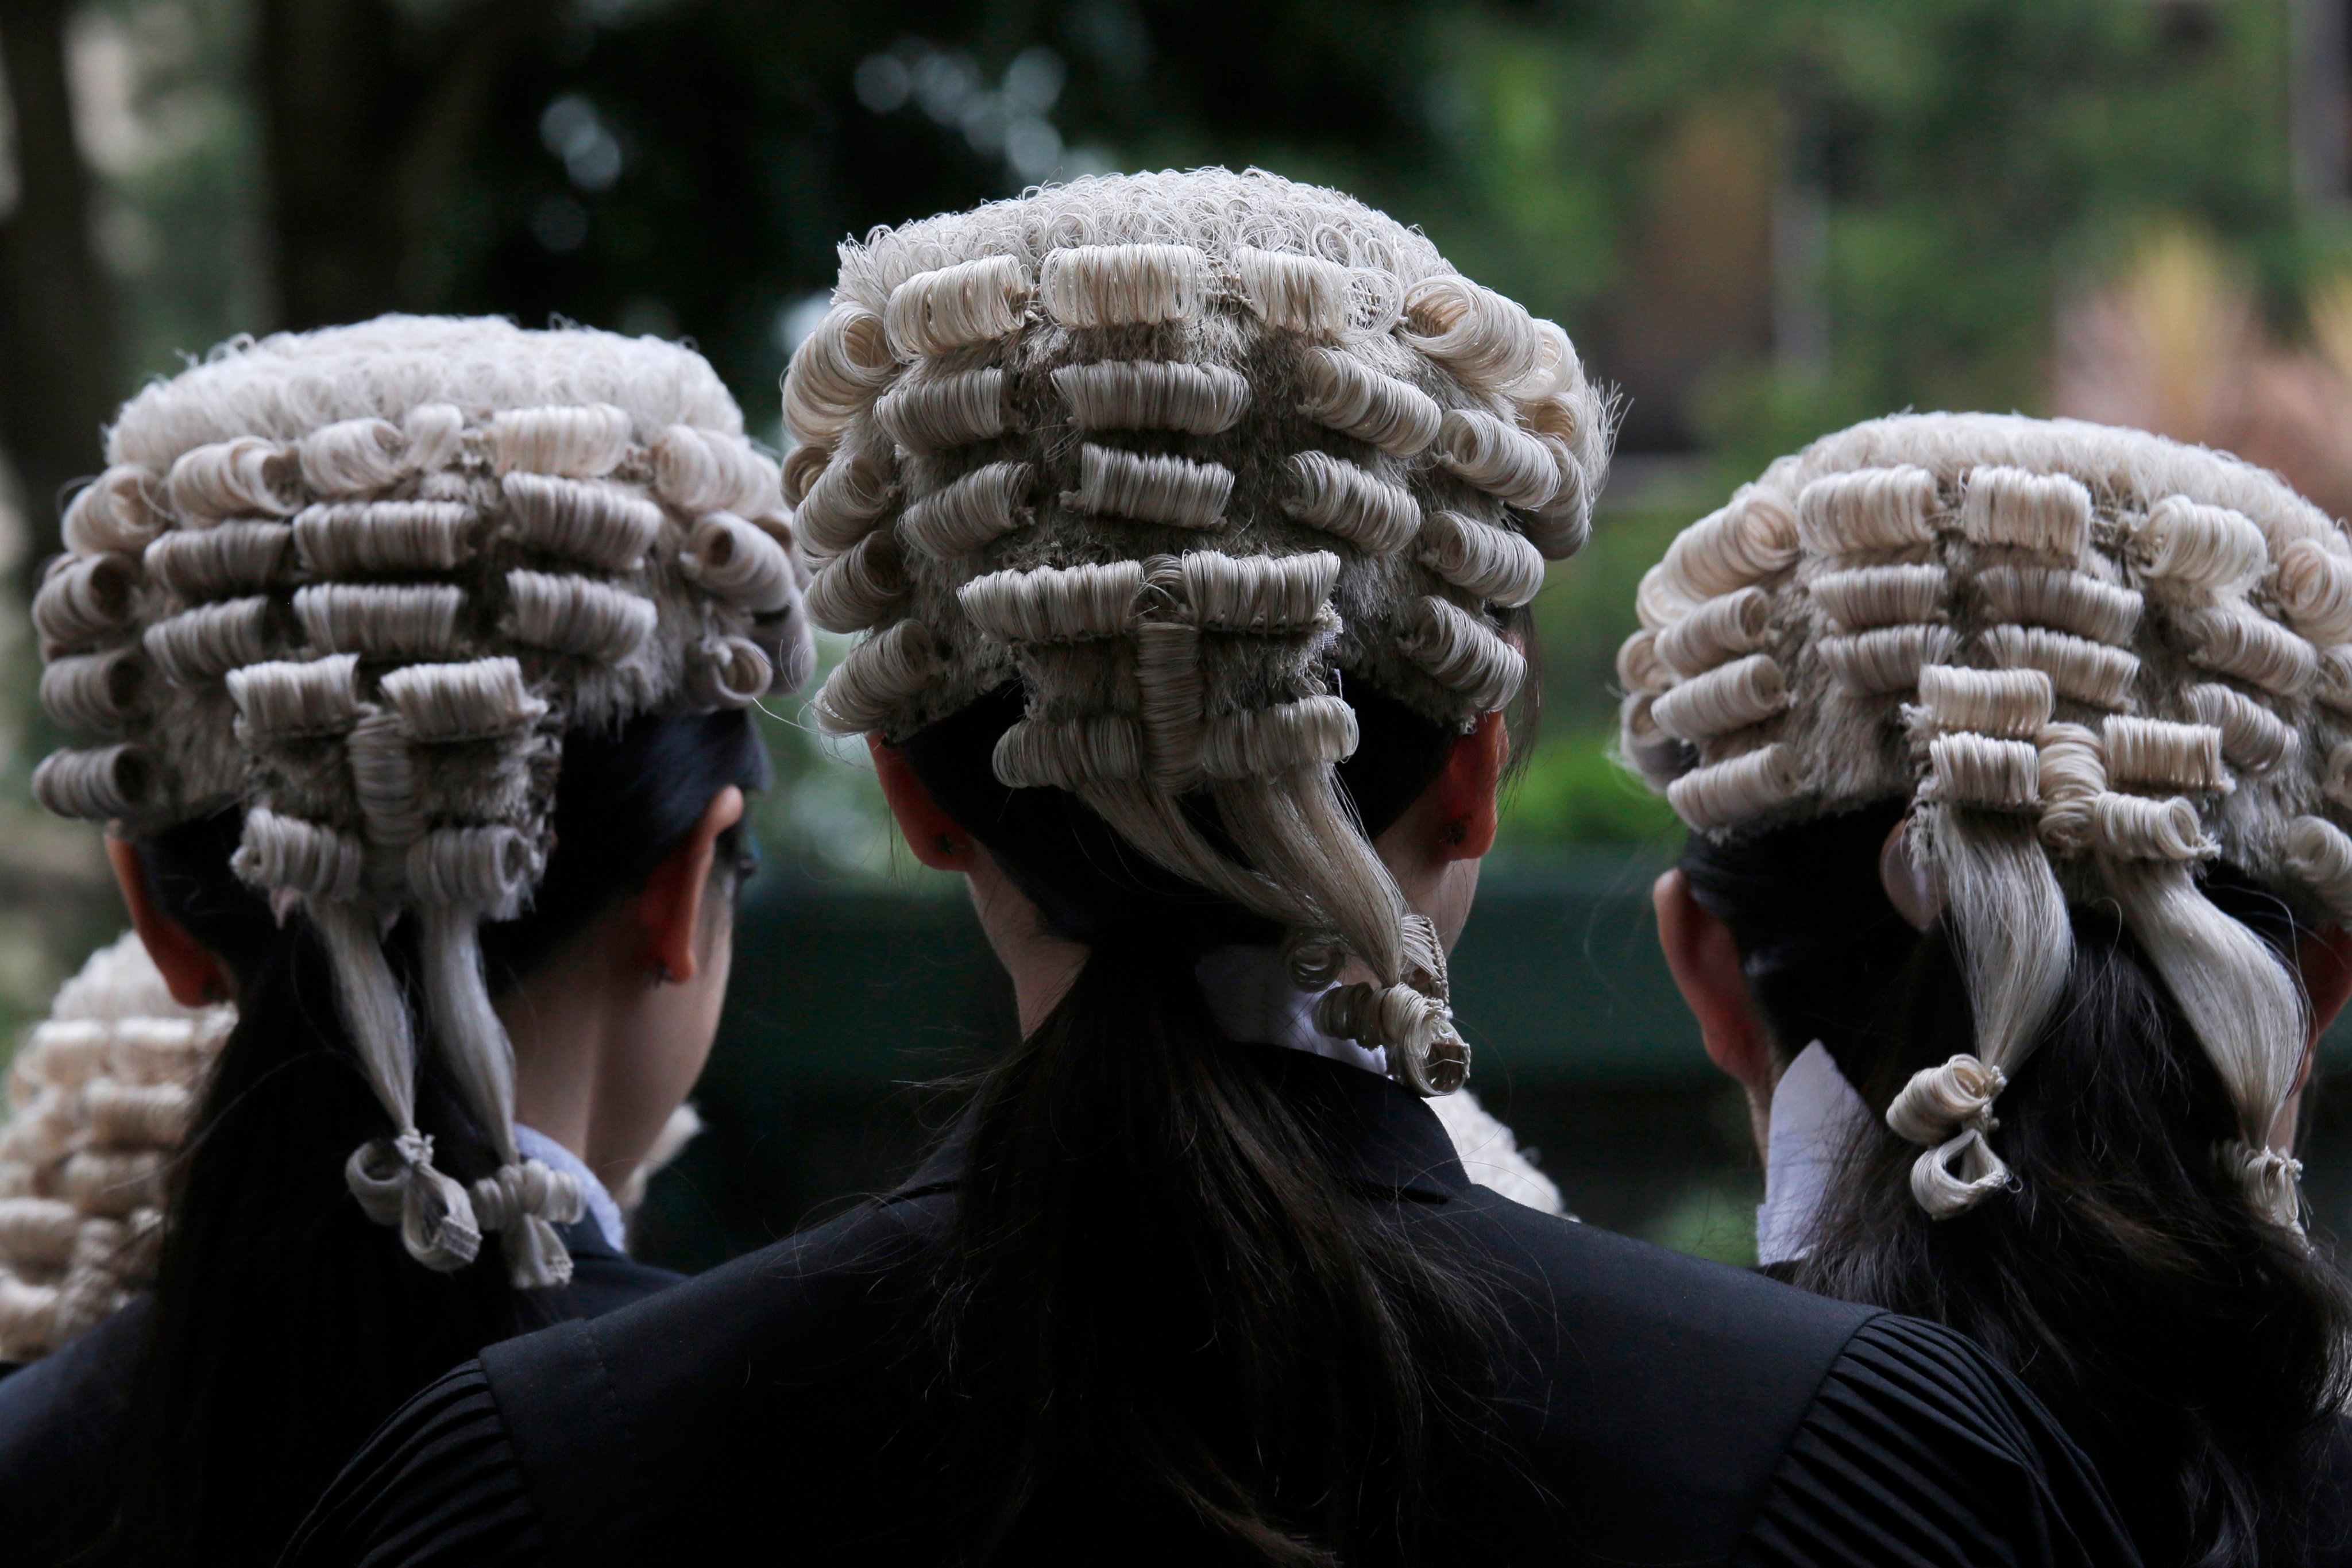 Law schools in Hong Kong have partnered with overseas institutions to provide more rounded qualifications. Photo: AP